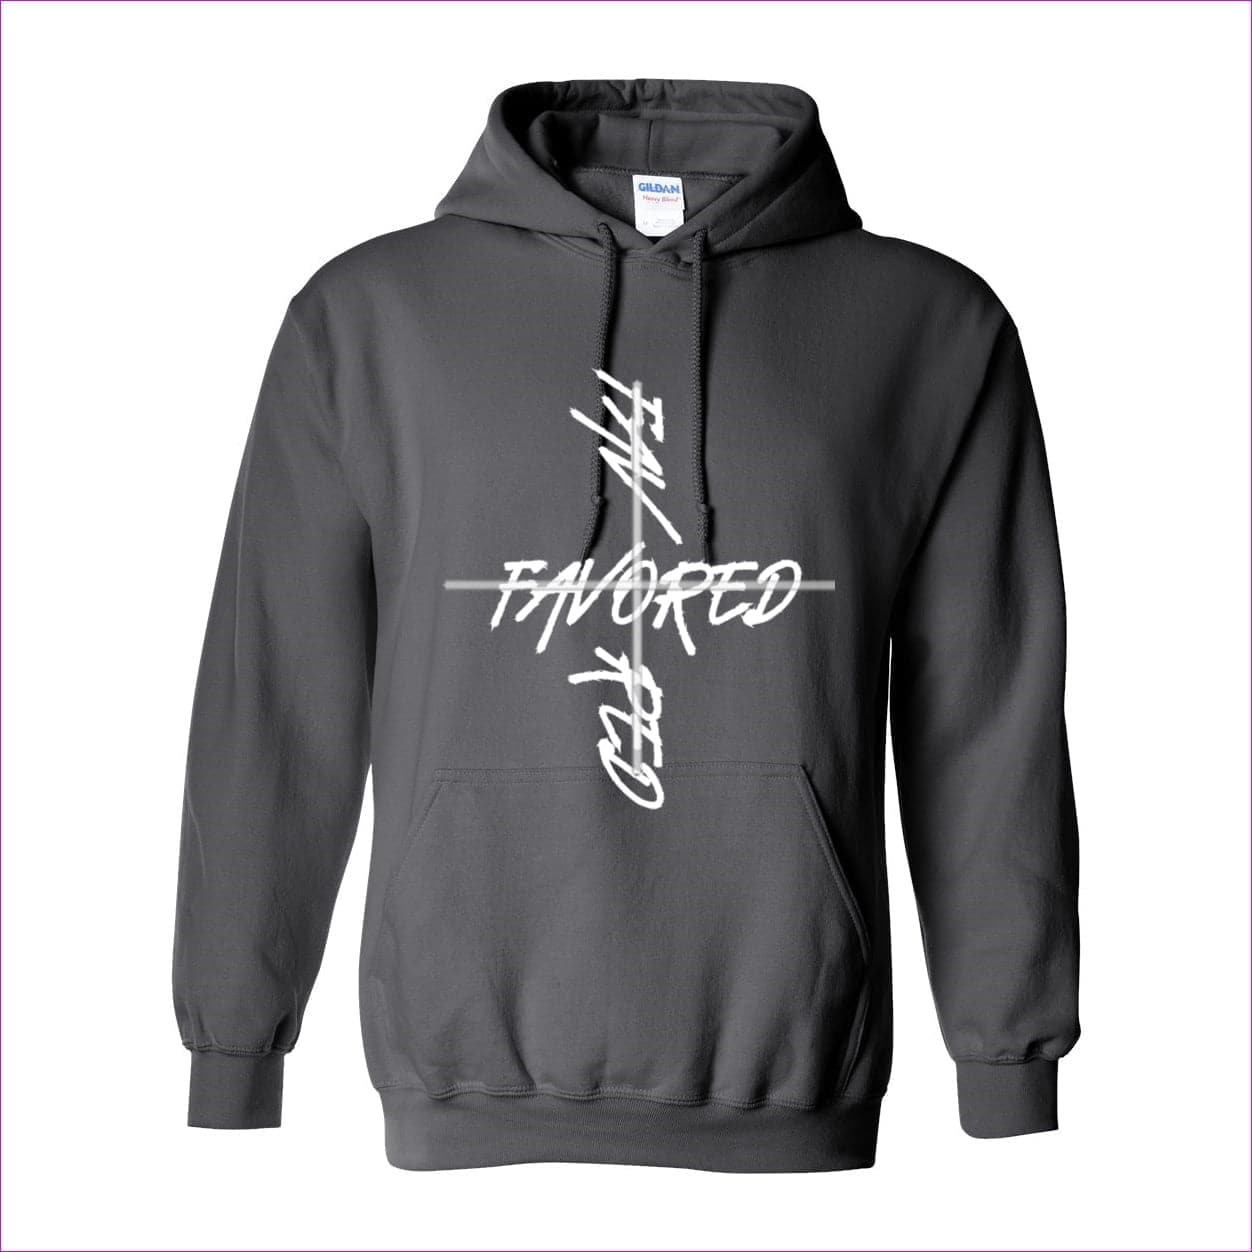 Charcoal - Favored 2 Unisex Heavy Blend Hooded Sweatshirt - unisex hoodies at TFC&H Co.